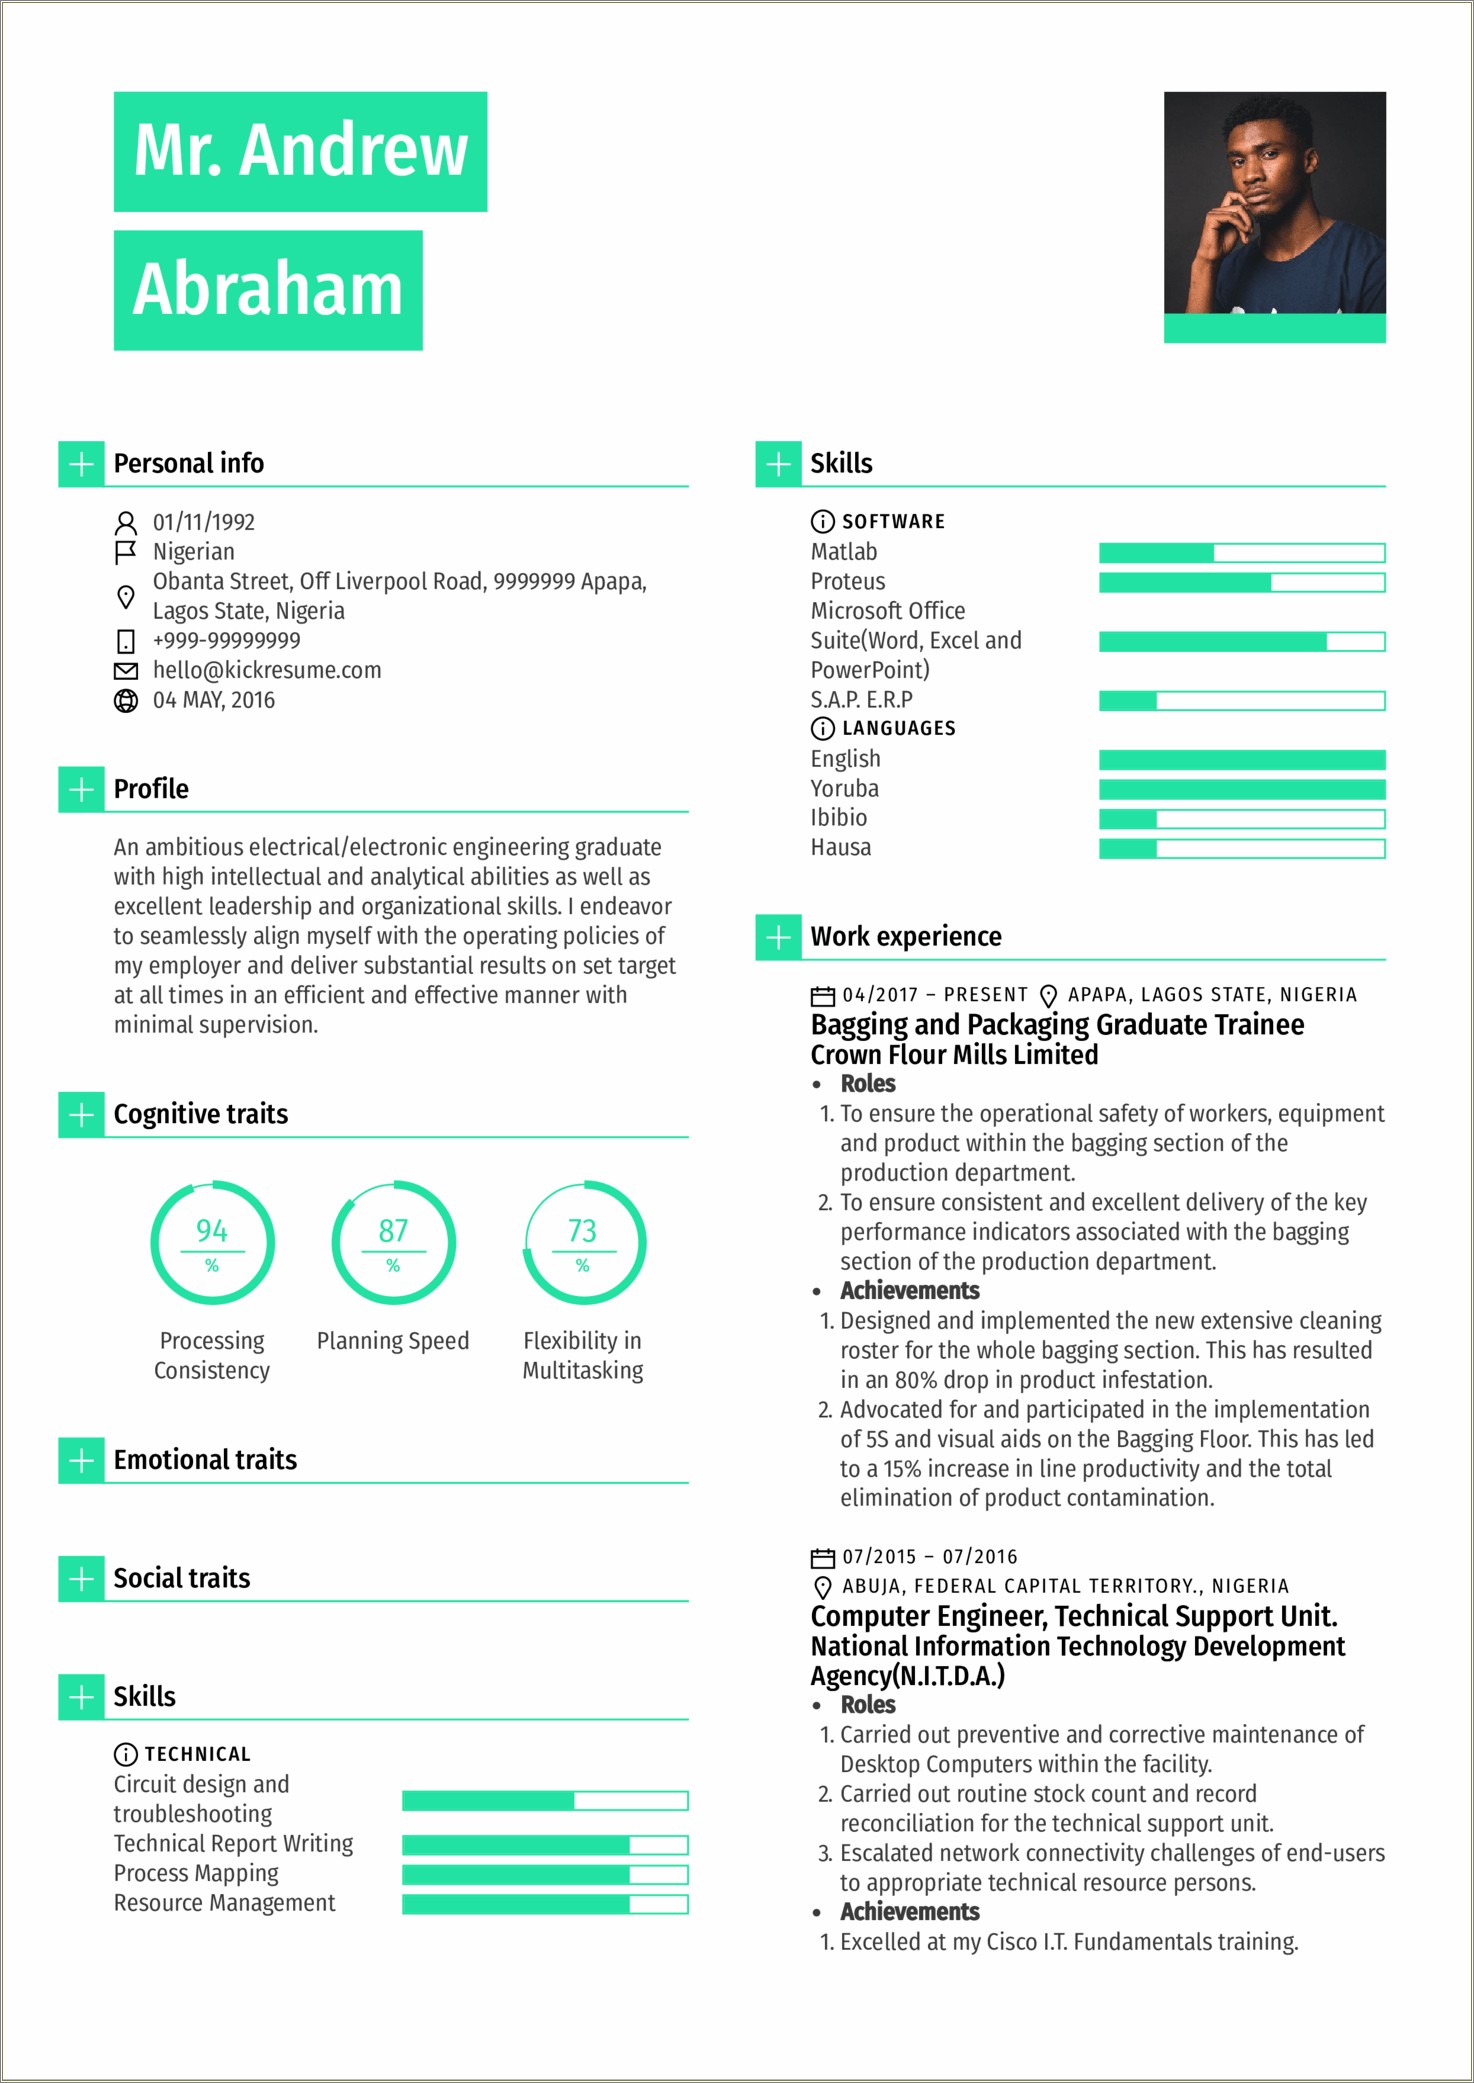 Sample Resumes For Mechanical Engineers Graduating College